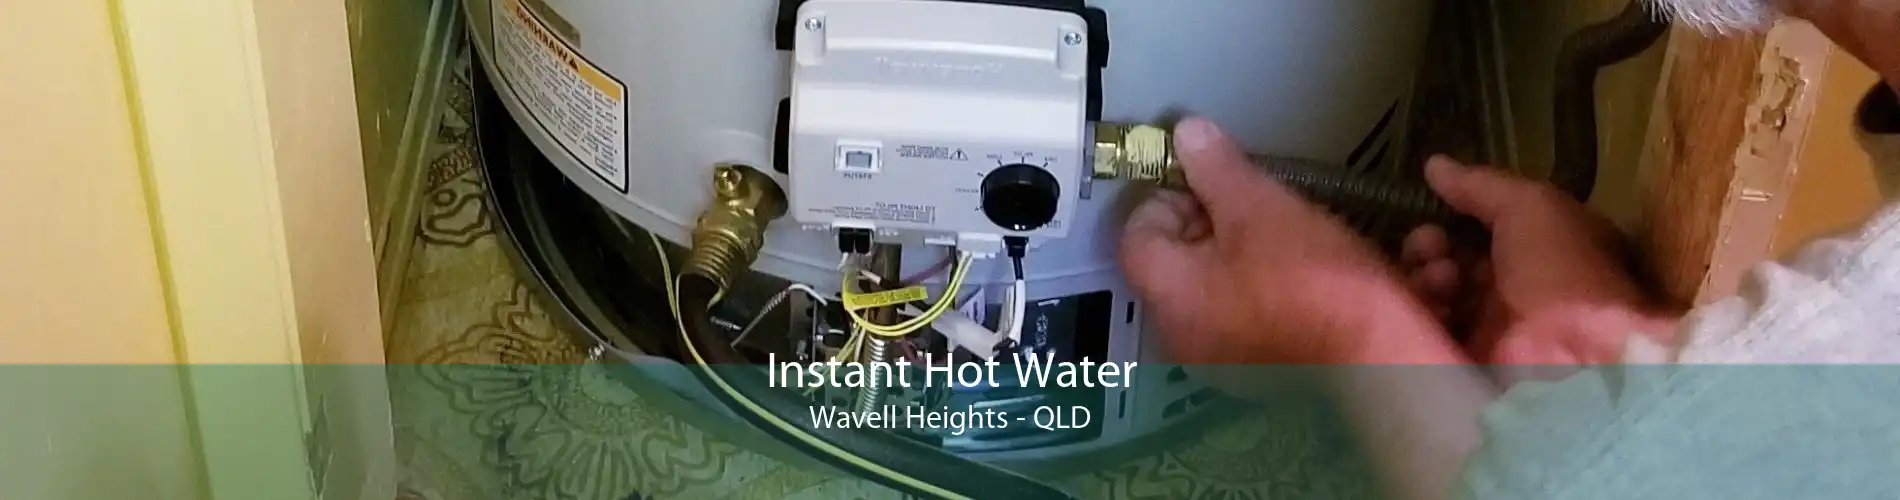 Instant Hot Water Wavell Heights - QLD